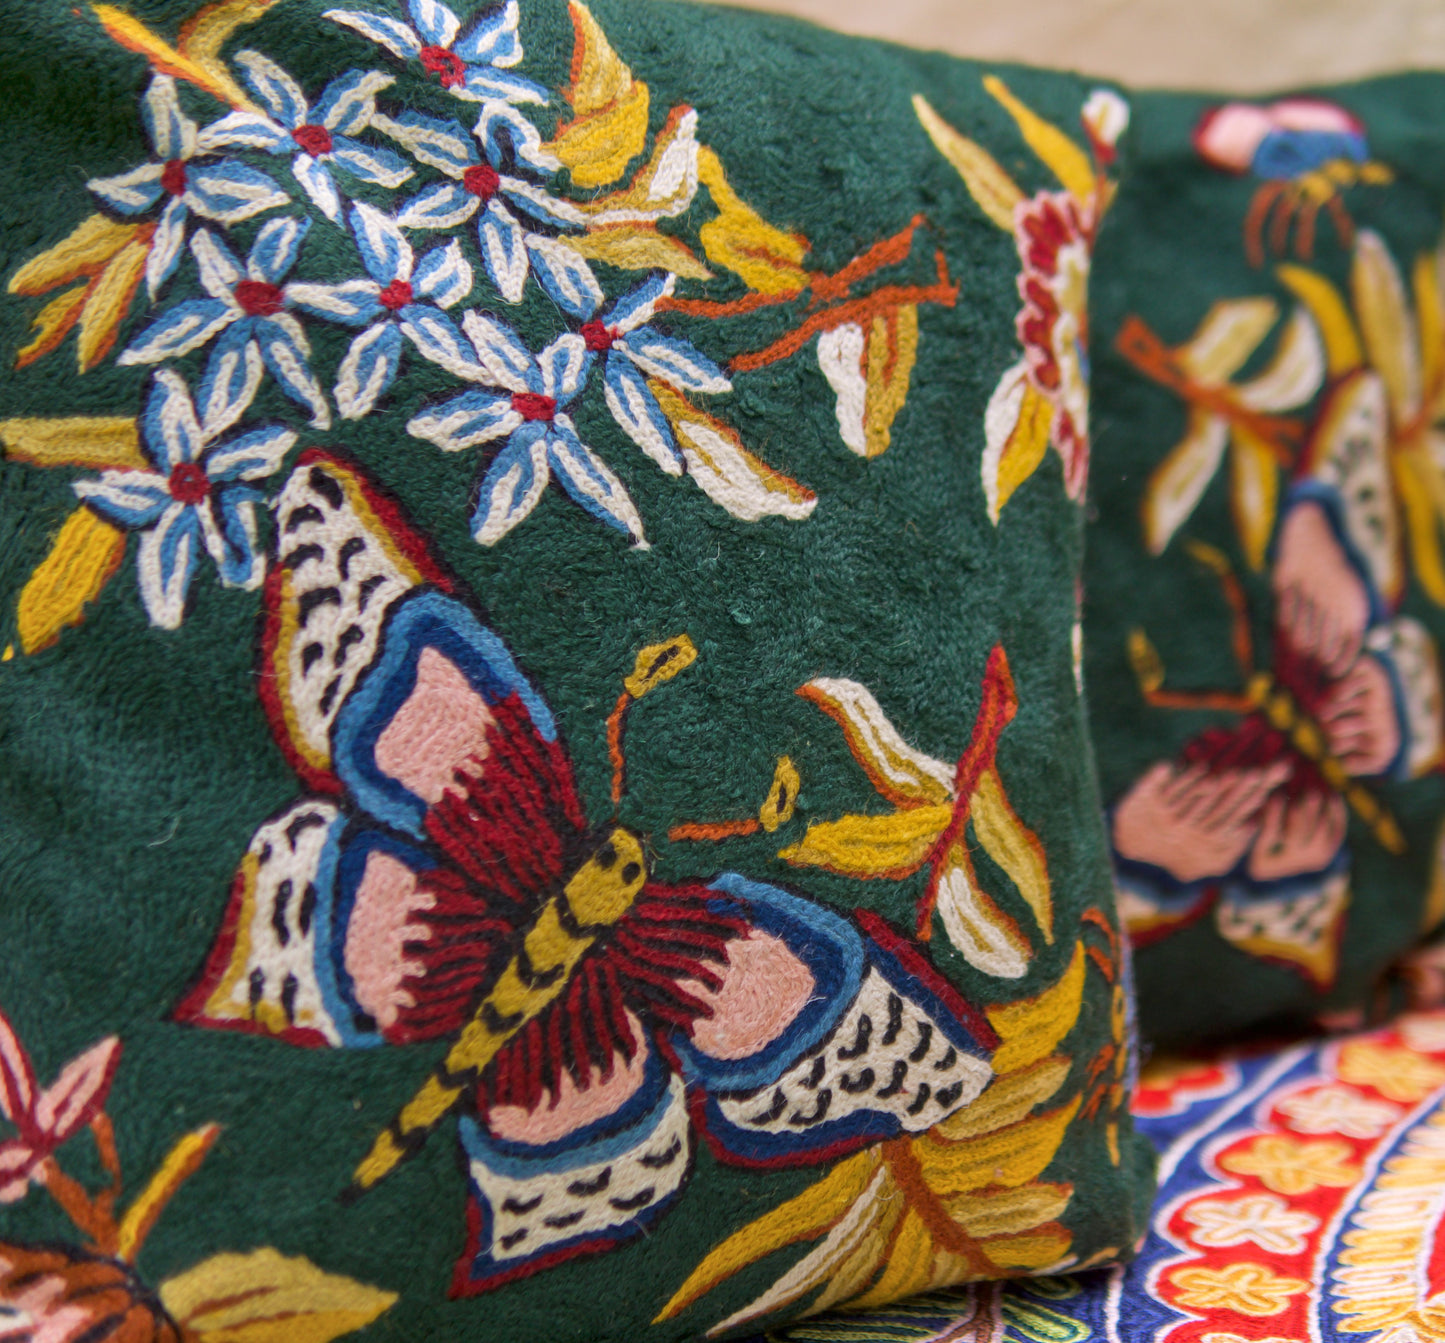 Tales Of Butterfly Cushion Covers with Hand Embroidery in Wool (Set of 2)